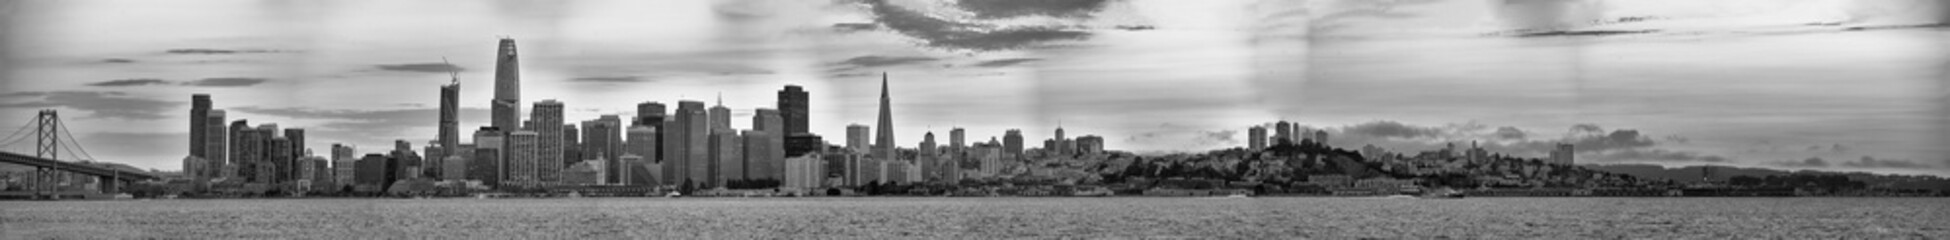 SAN FRANCISCO, CA - AUGUST 4, 2017: Panoramic sunset view of city skyline. The city attracts 20...